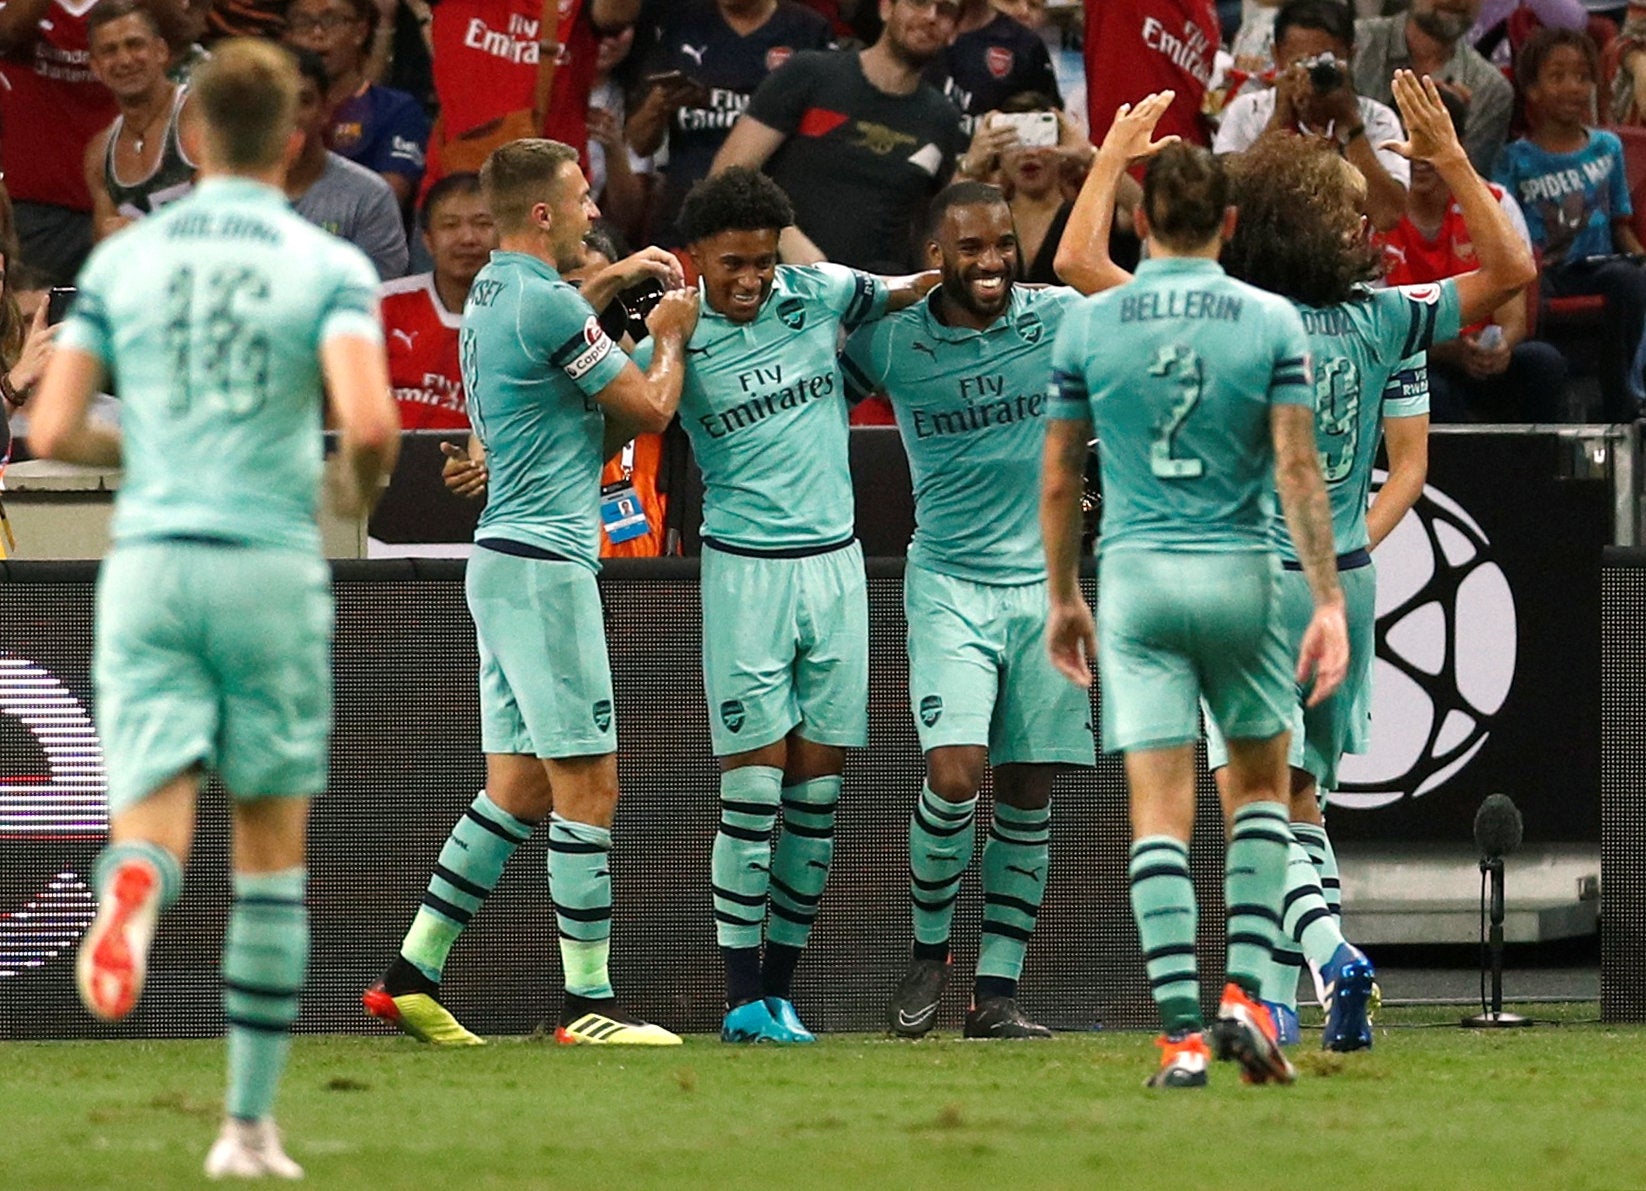 Arsenal vs PSG - LIVE: Latest score, goals and updates from